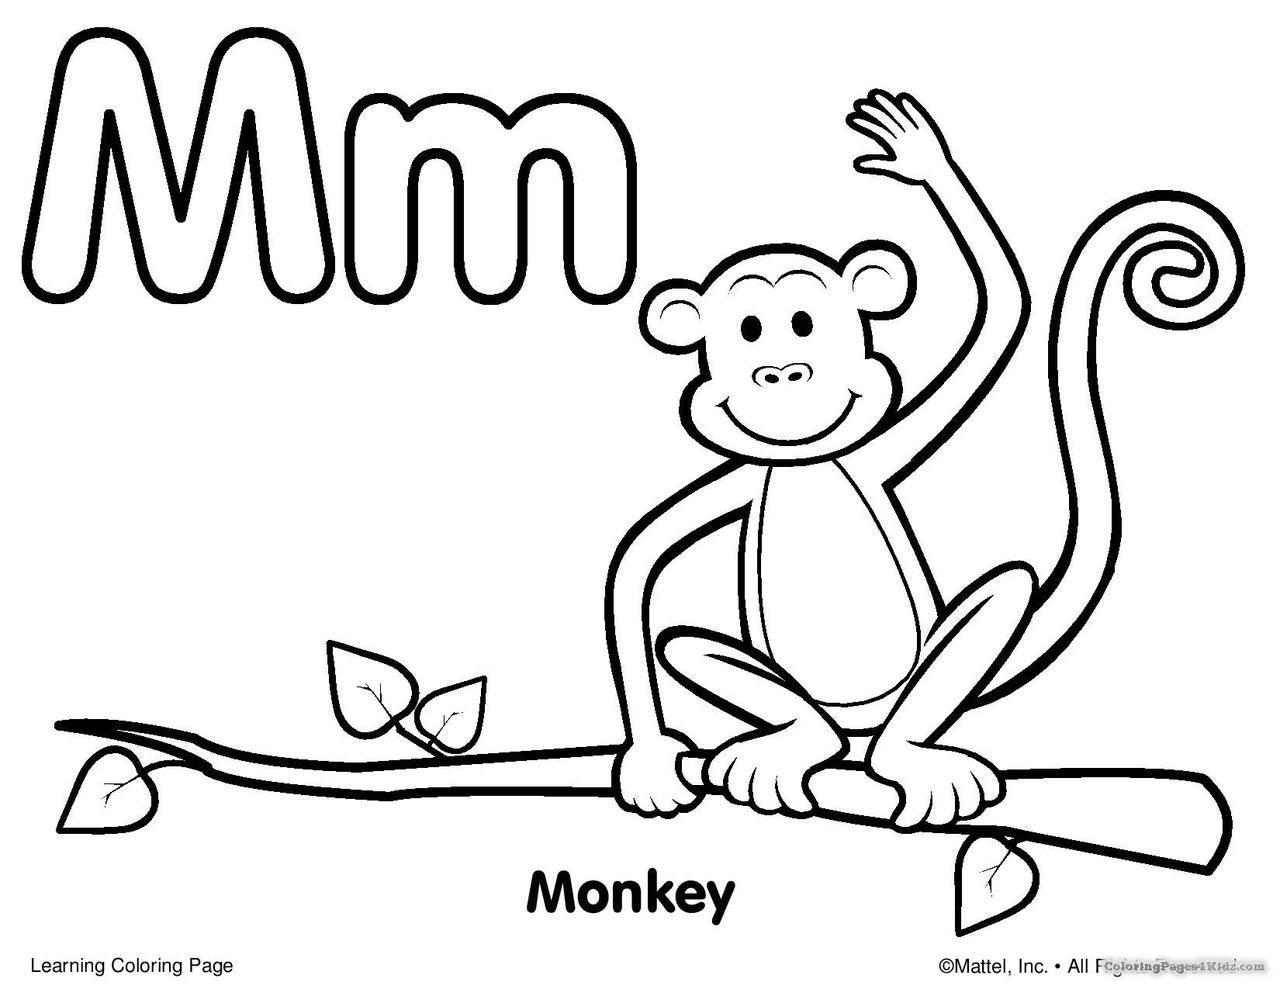 Free Alphabet M for Monkey Coloring Pages printable